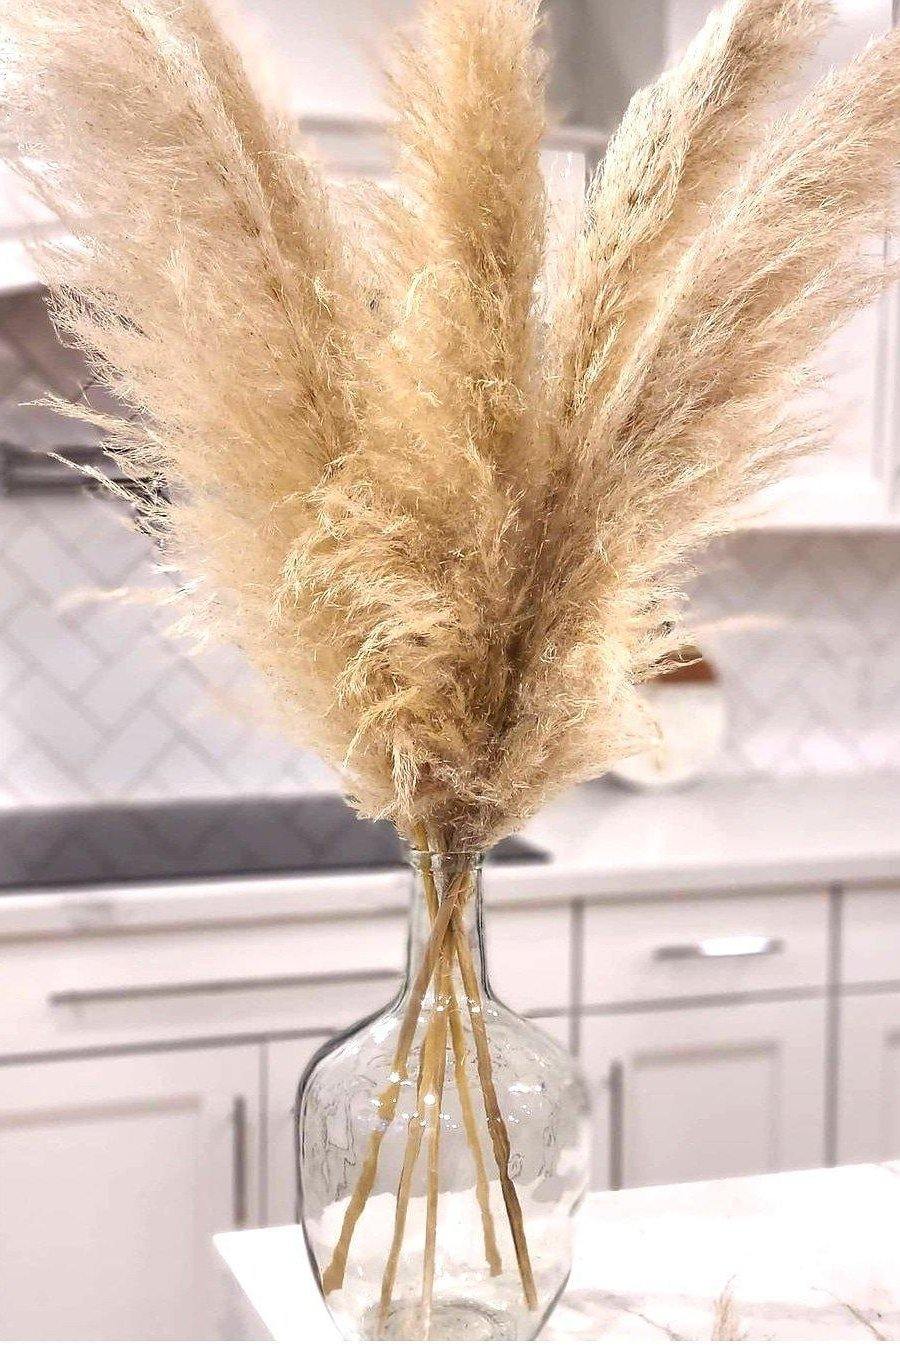 Gold Grass, Decorative Plumes, Natural Dried Plumes, Pampas Grass, Pampas  Grass Decor, Fall Decorations Indoor, Gold Grass Decor -  Norway